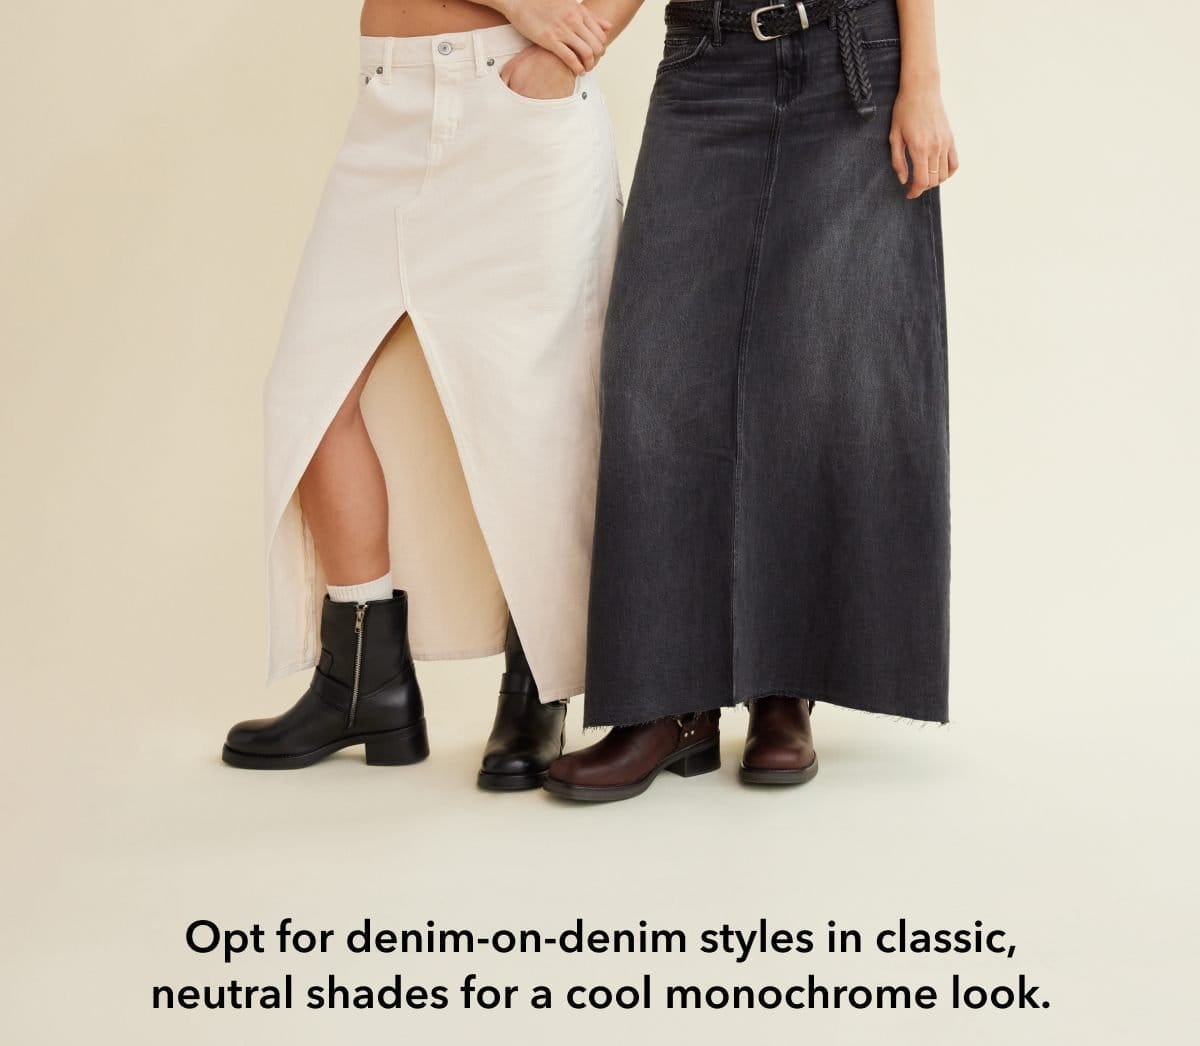 Opt for denim-on-denim styles in classic, neutral shades for a cool monochrome look.